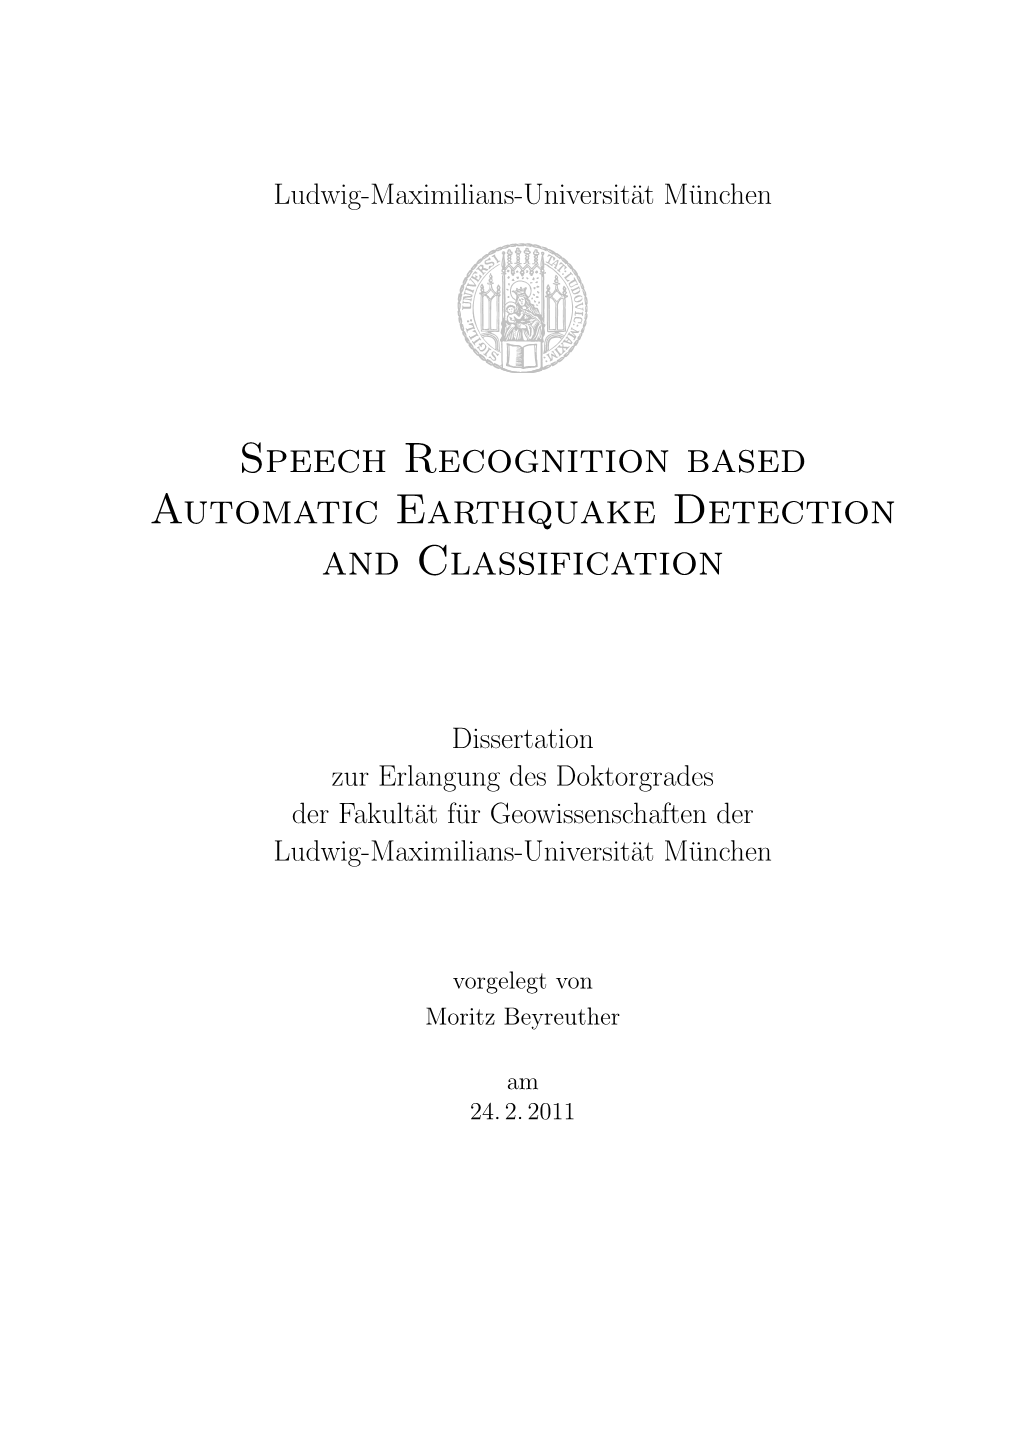 Speech Recognition Based Automatic Earthquake Detection and Classification